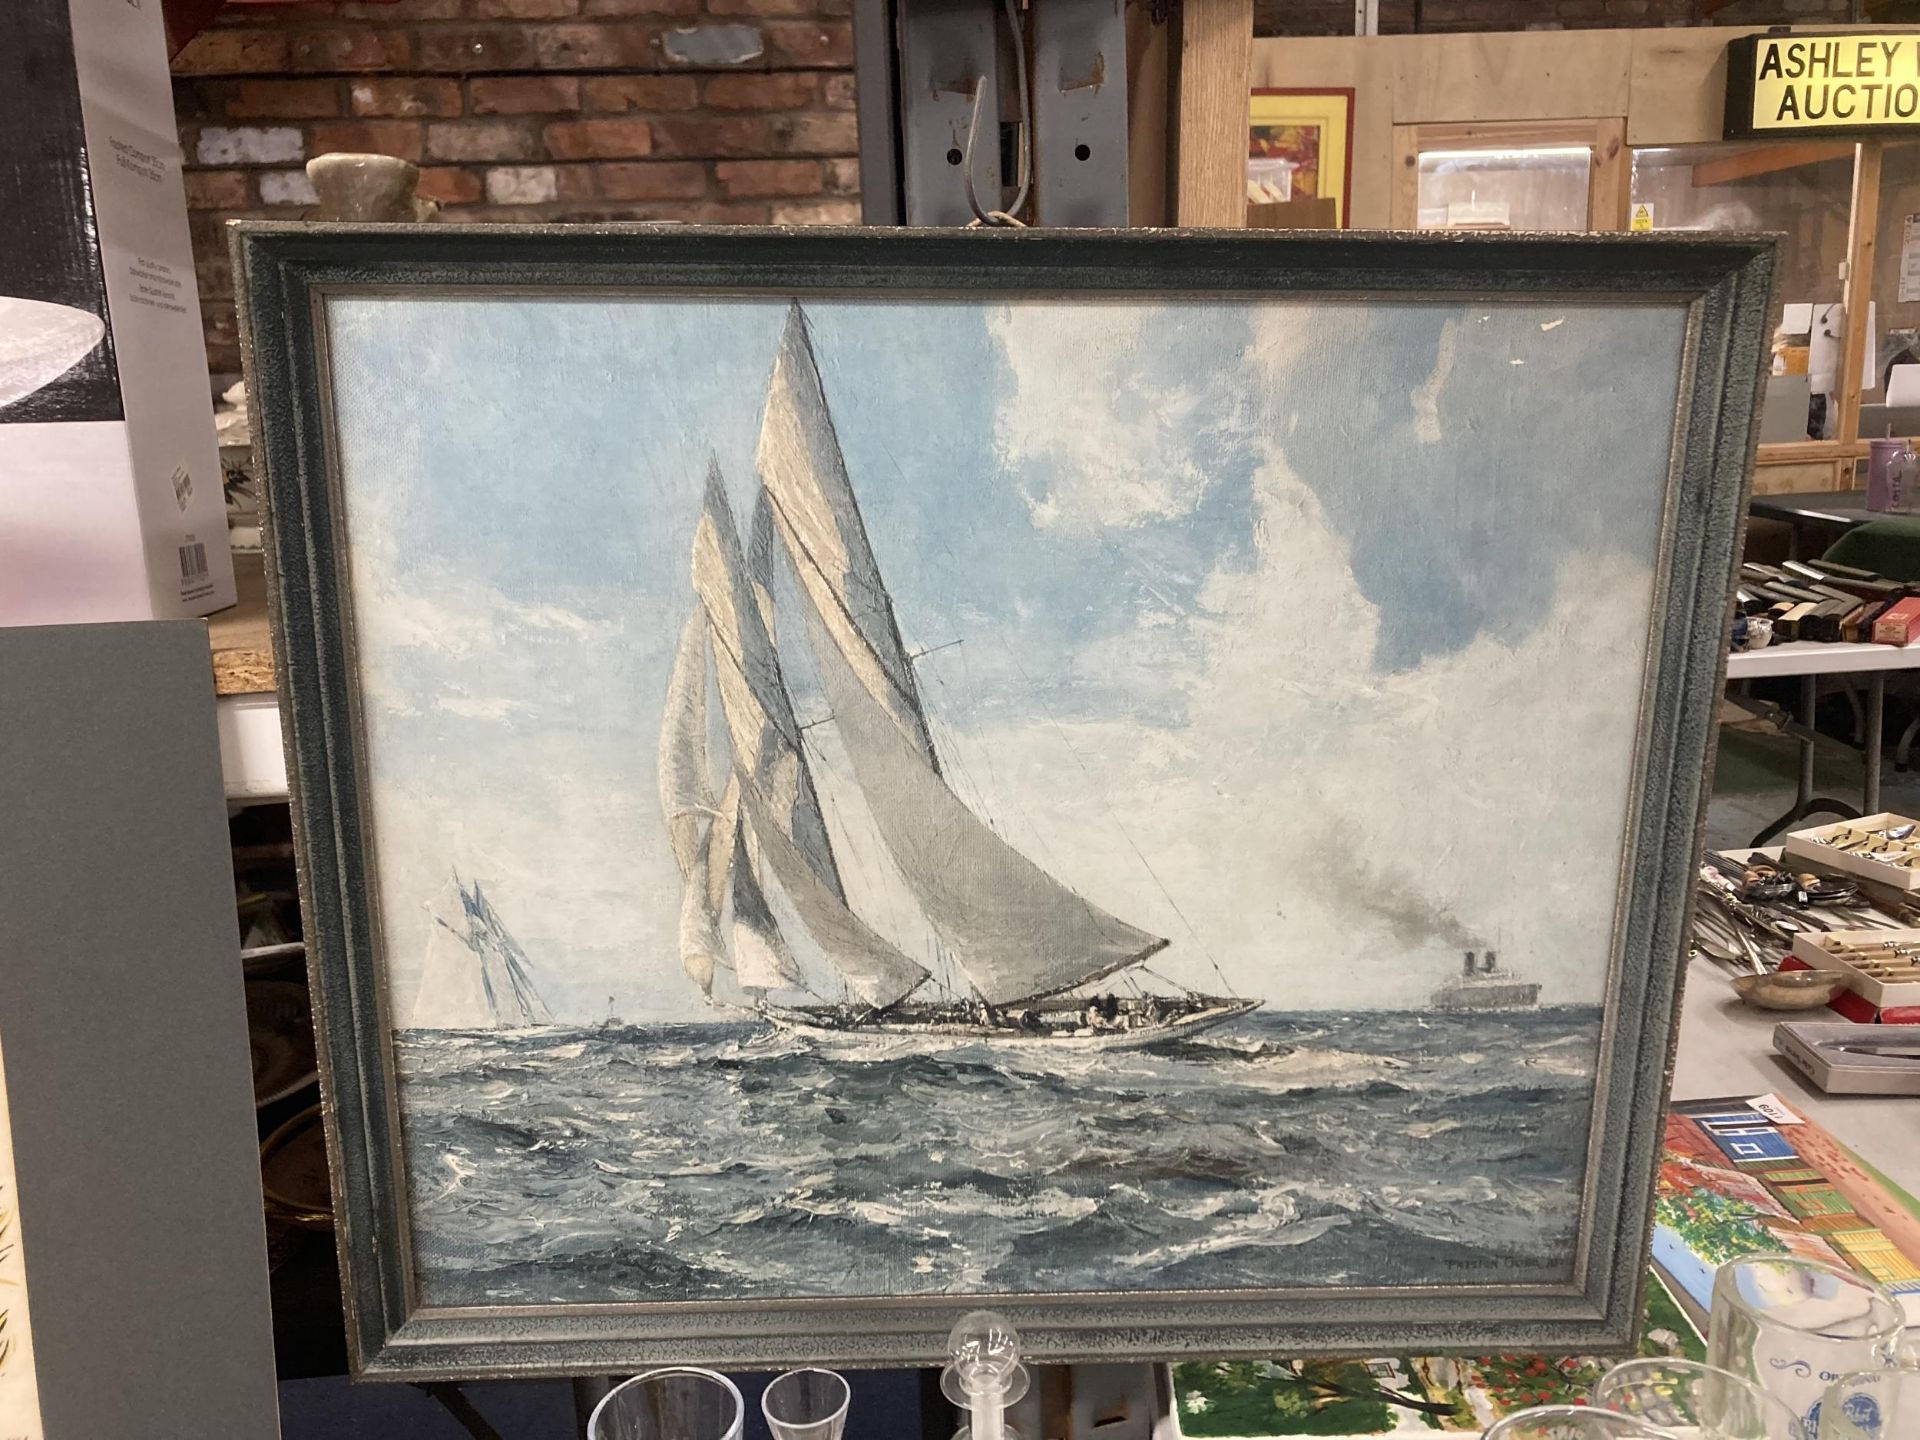 A PRINT OF AN OIL ON CANVAS YACHTING SCENE ON STORMY WATERS